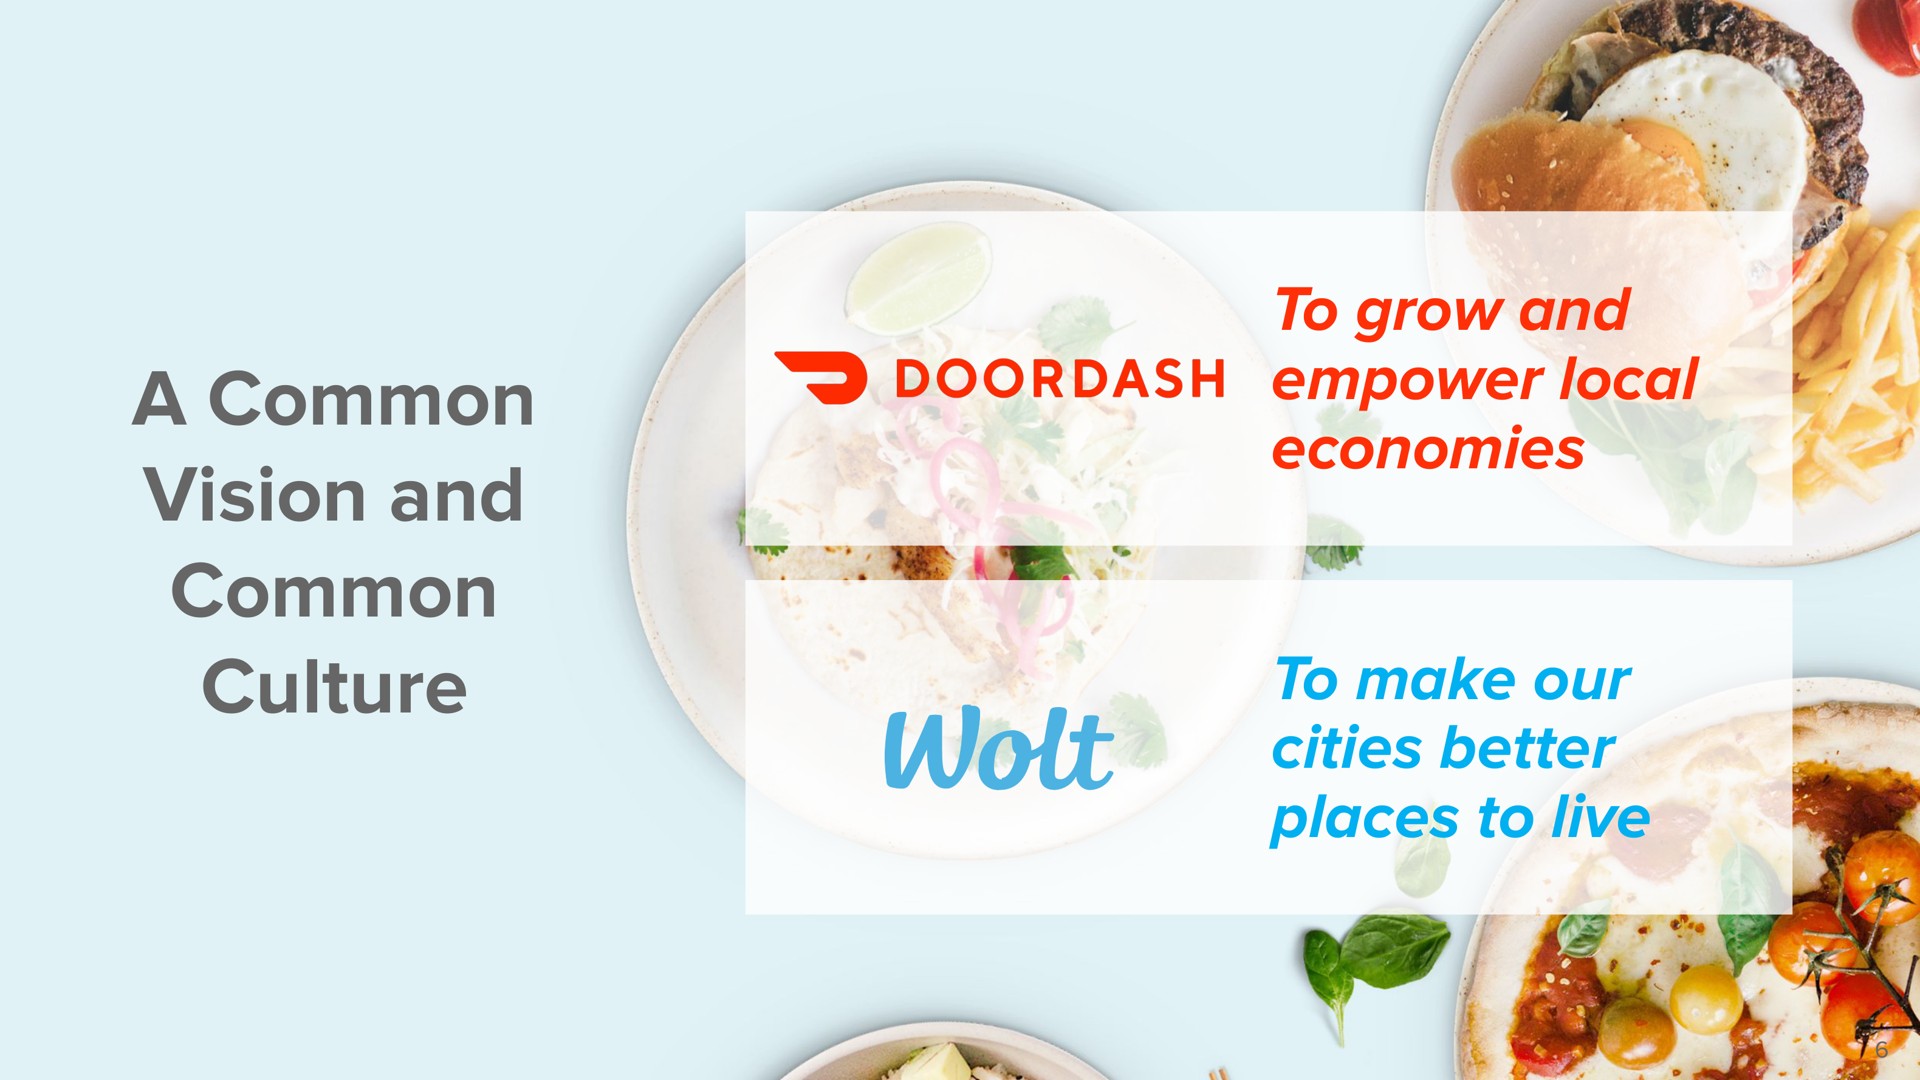 projects divinities presentations investor presentation warsaw investor presentation a common vision and common culture to grow and empower local economies to make our cities better places to live | DoorDash